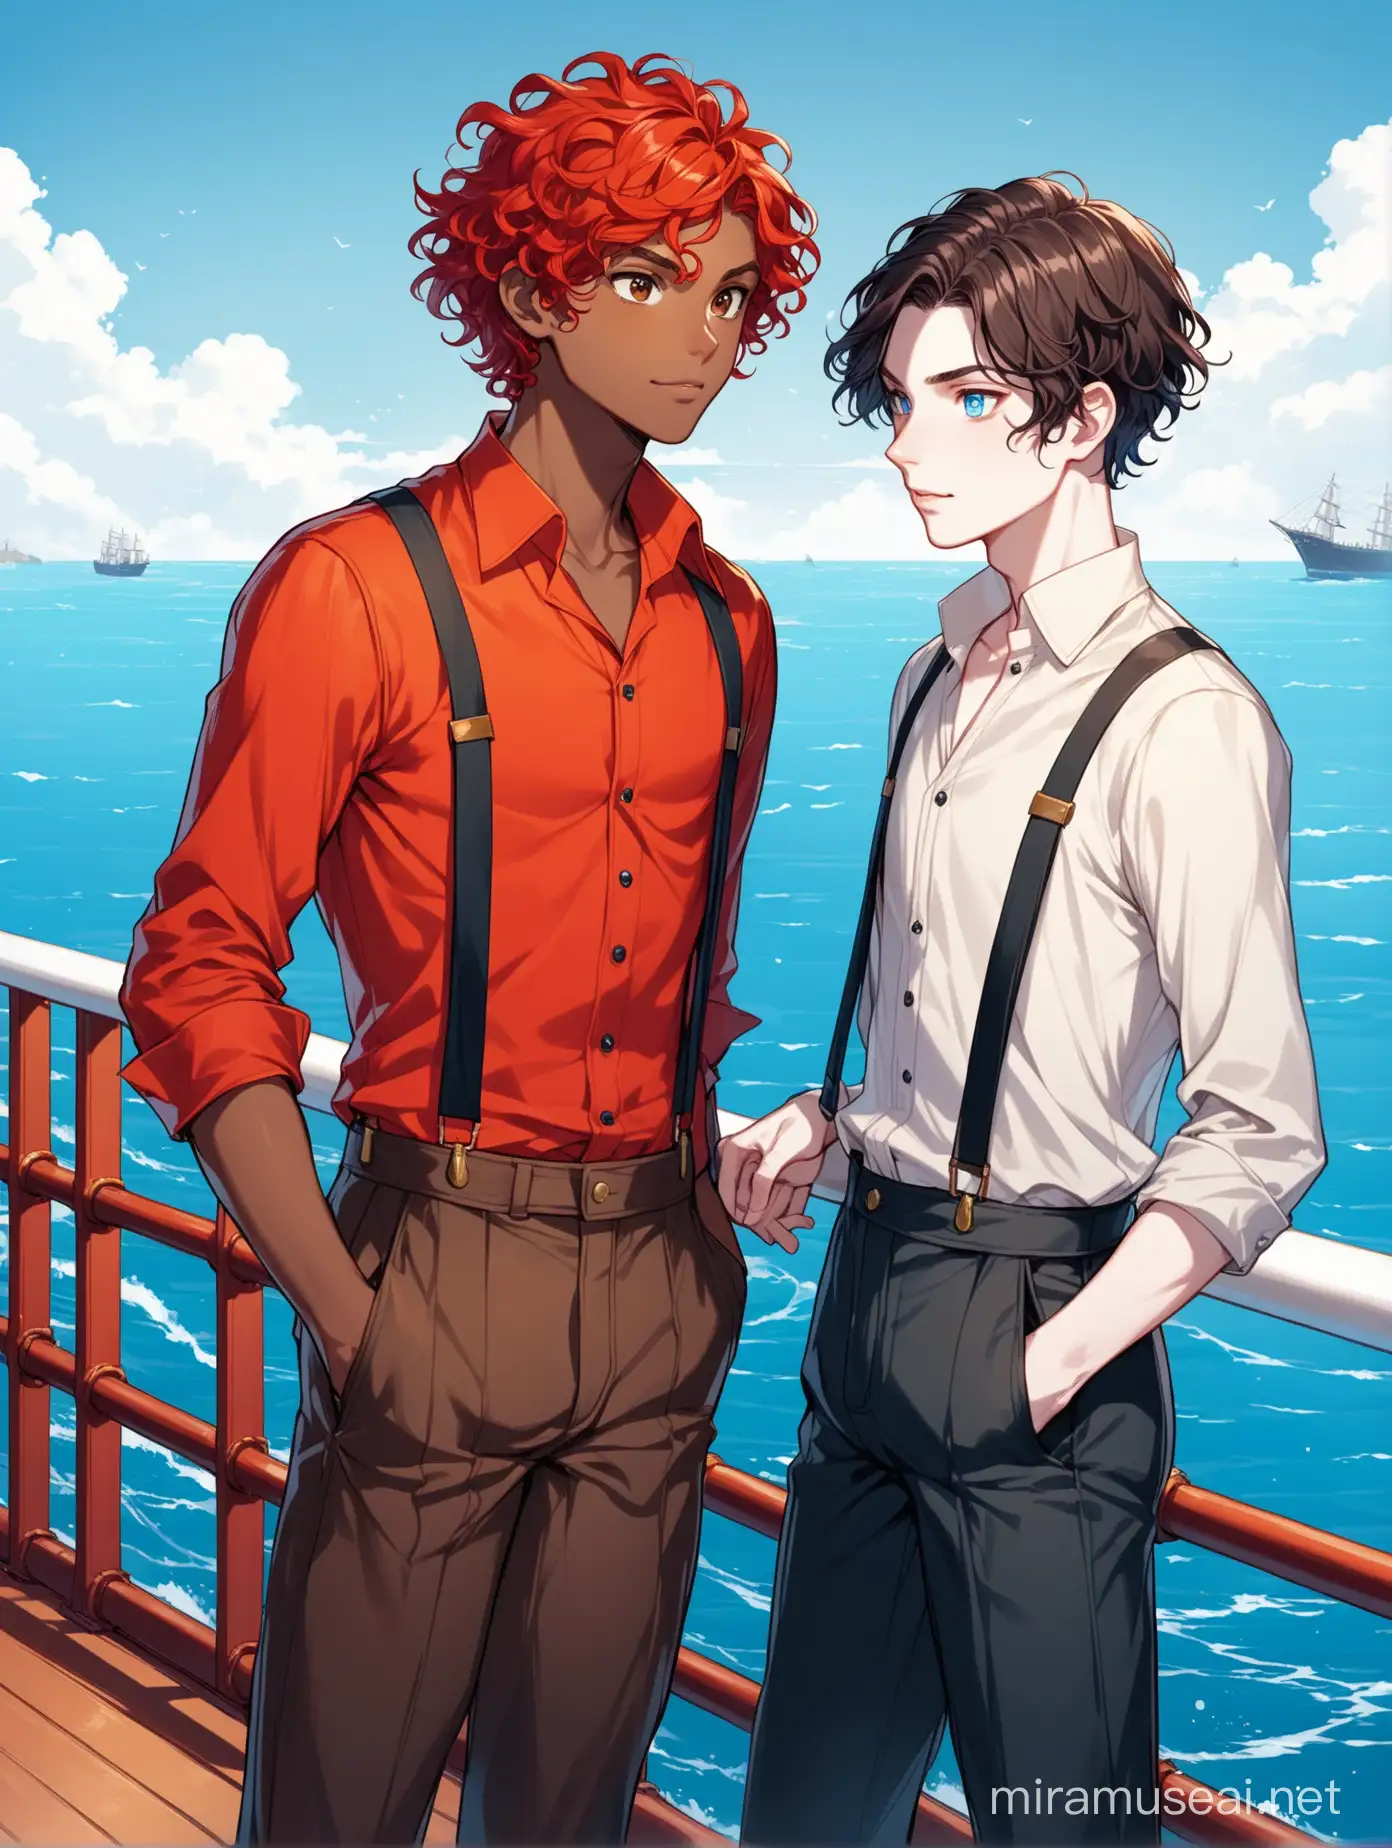 Wylan (red curls boy, pale skin and blue eyes, undersized, 26 years old) is talking seriously with Jesper (light-dark skin boy, short dark hair, lanky, brown eyes, 27 years old) near the rail of a ship sailing on the sea. Jesper is dressed in a bright outfit: shirt, trousers with suspenders.